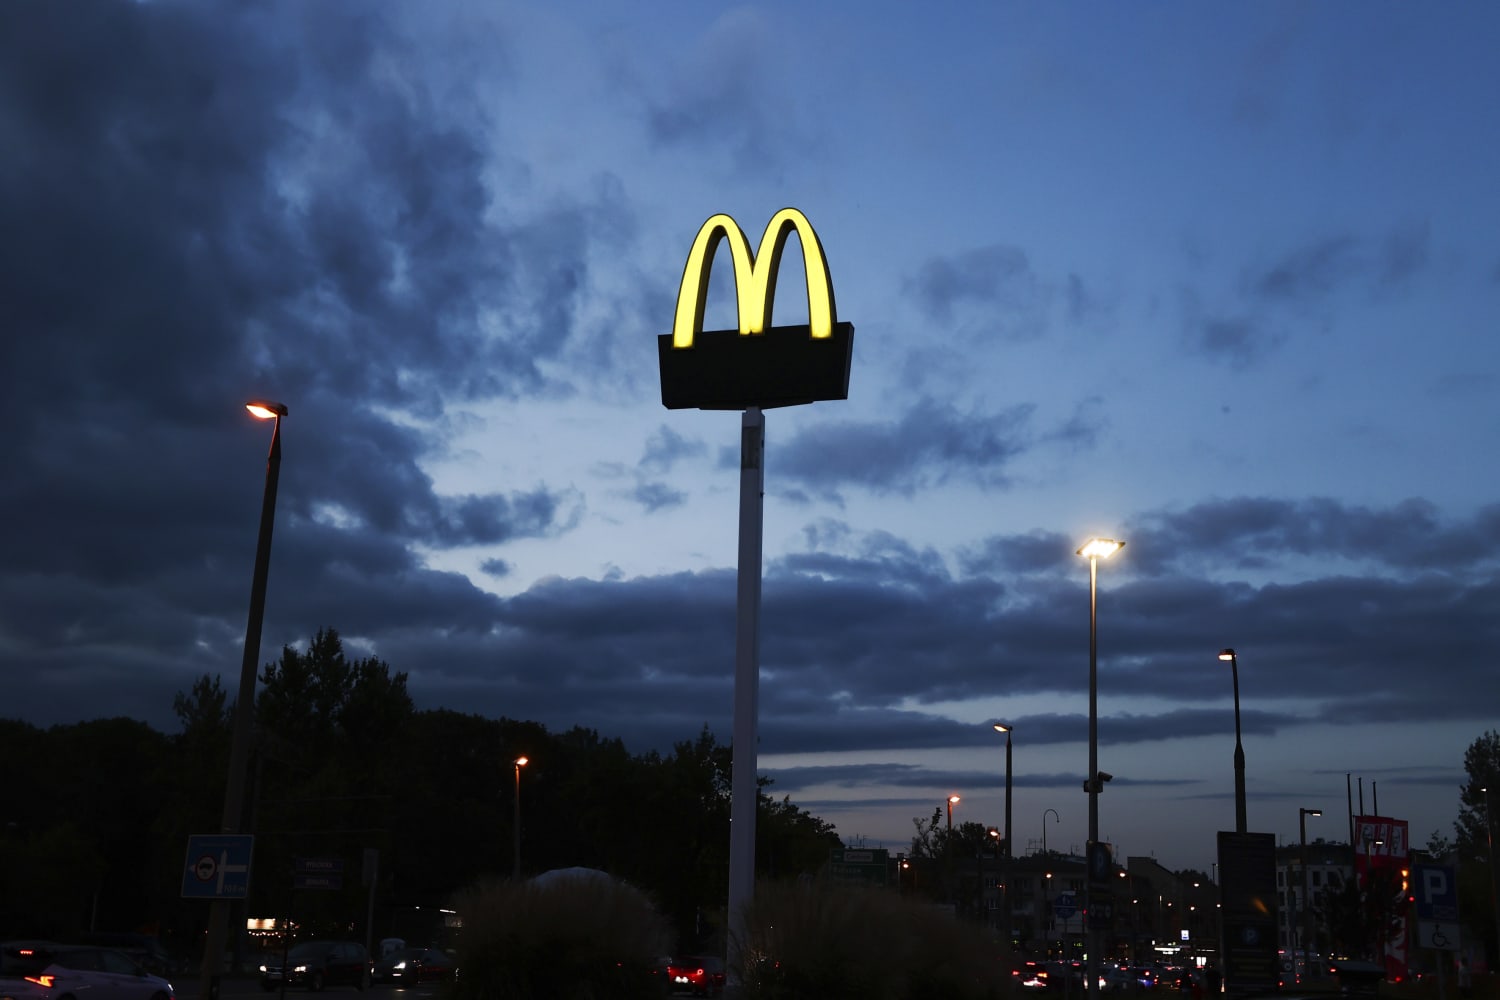 10-year-olds among hundreds of children found working at McDonald’s restaurants